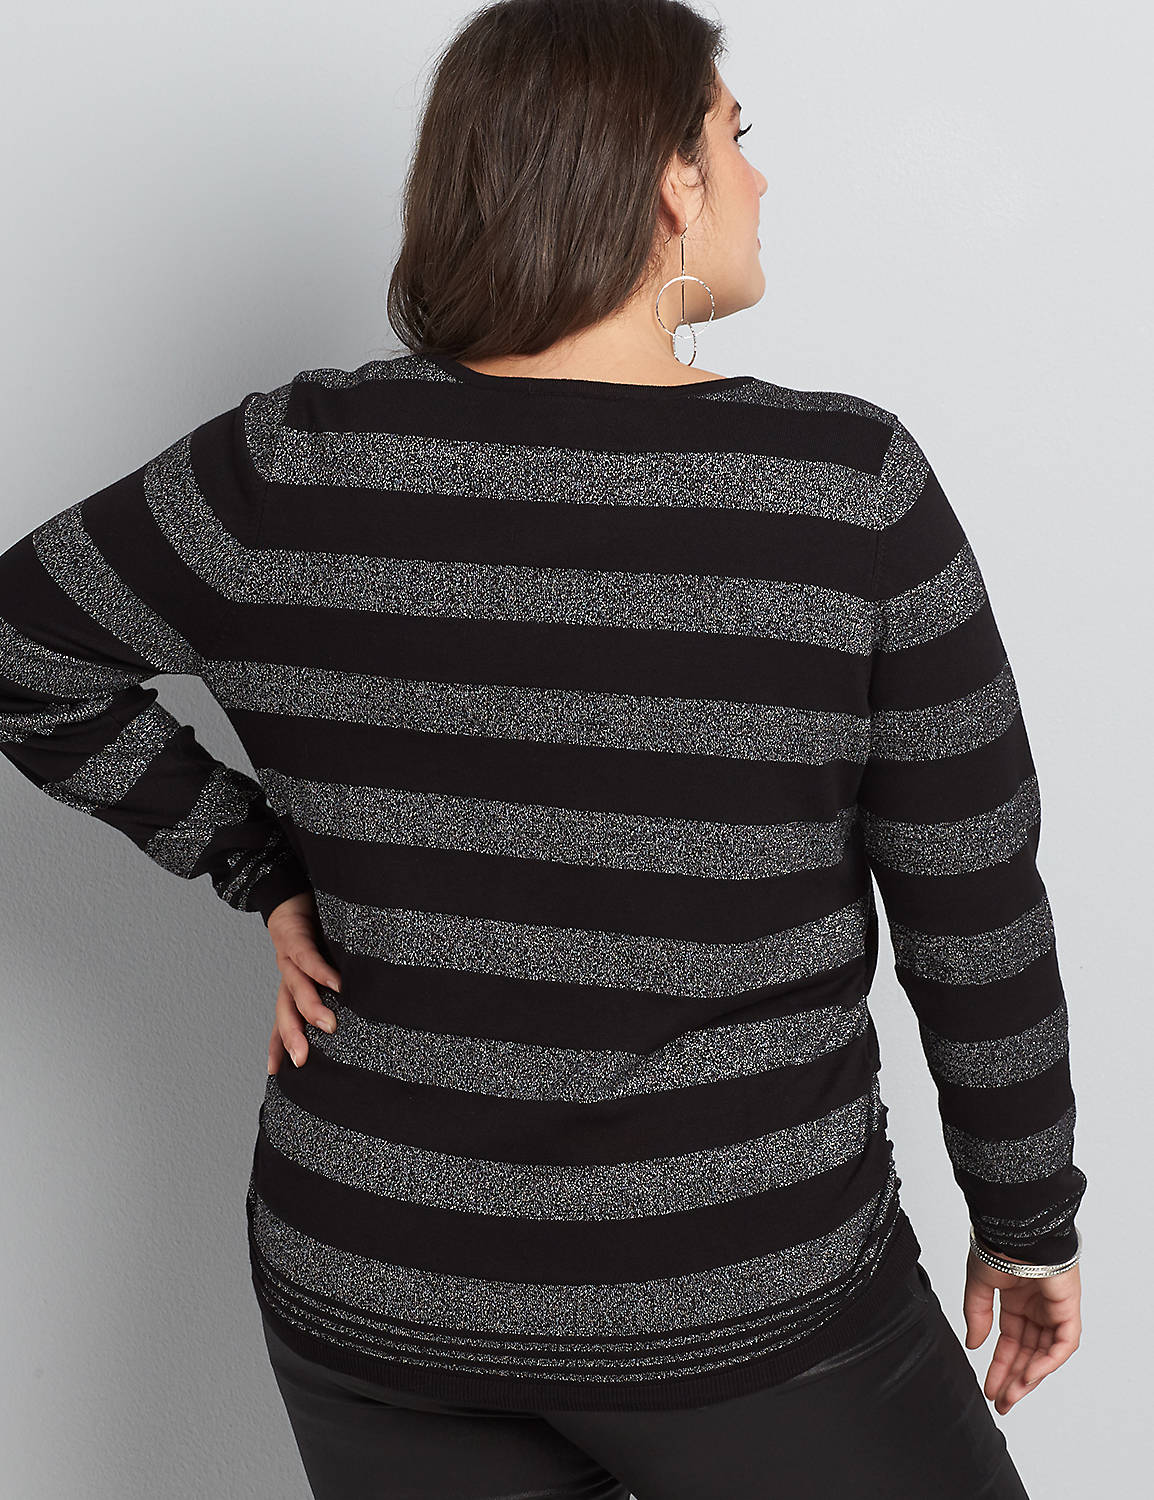 Long Sleeve Boatneck Pullover with Stripes 1118027:Pitch Black LB 1000322:22/24 Product Image 2